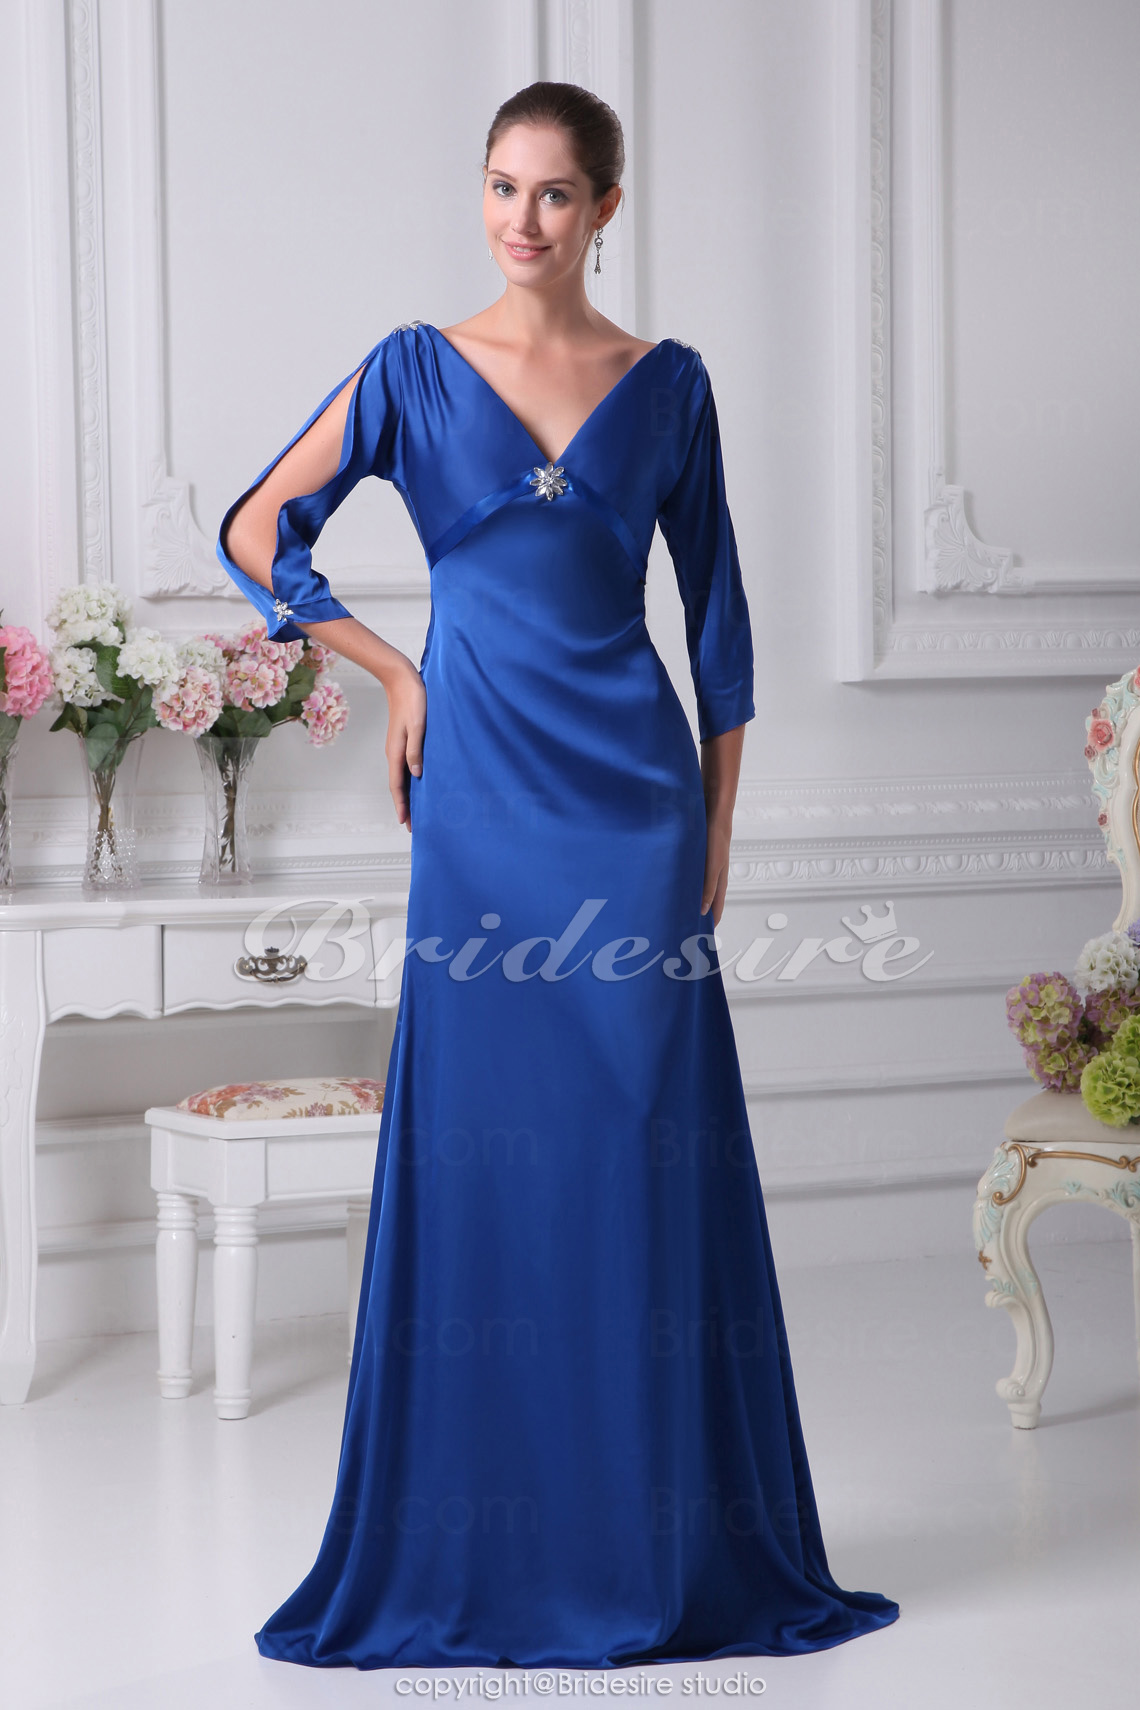 A-line V-neck Sweep/Brush Train 3/4 Length Sleeve Stretch Satin Mother of the Bride Dress